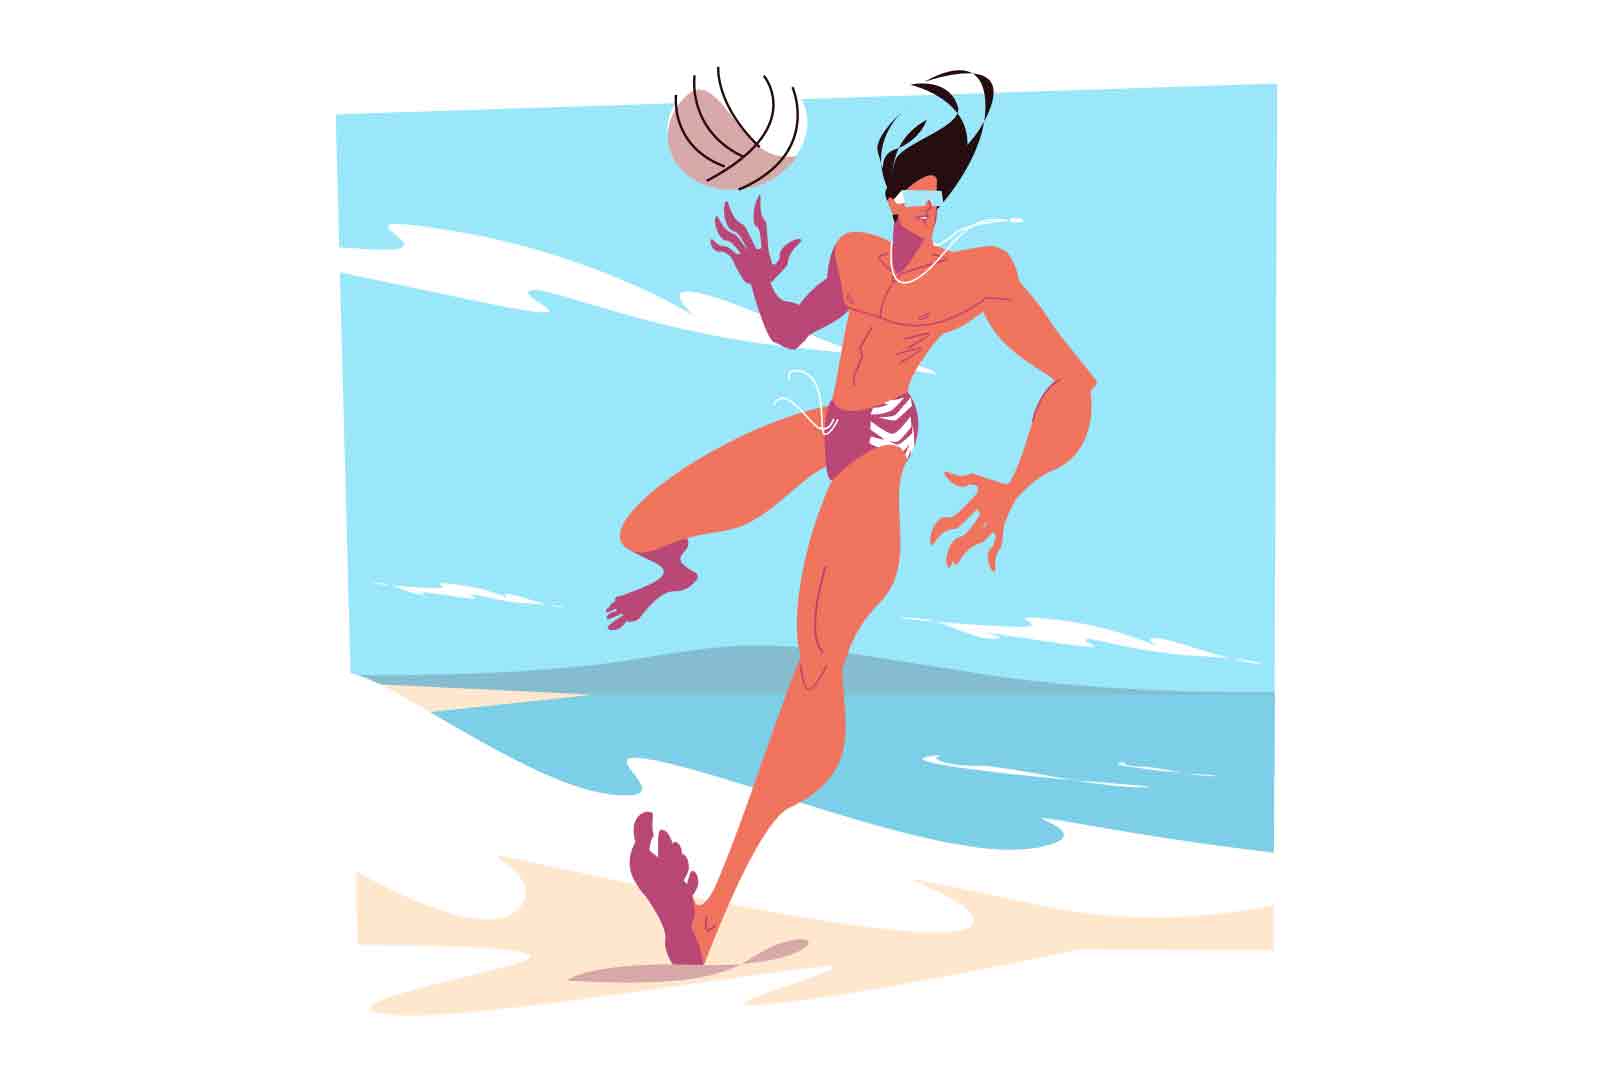 Guy playing beach volleyball on sea shore vector illustration. Sportsperson hits ball. Active game and recreation flat style concept